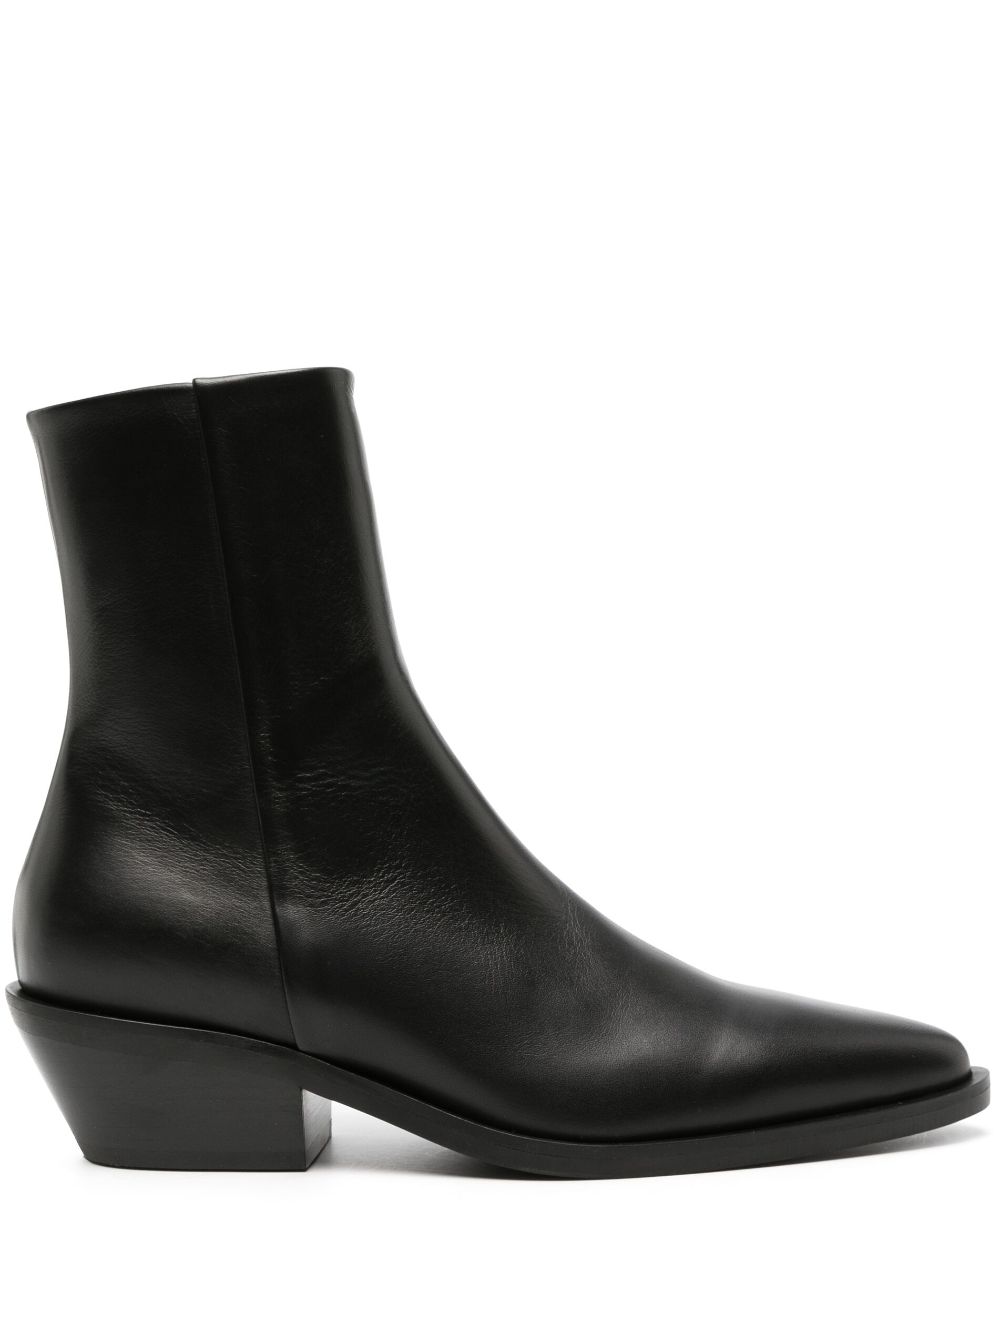 A.EMERY Hudson leather ankle boot - Black von A.EMERY